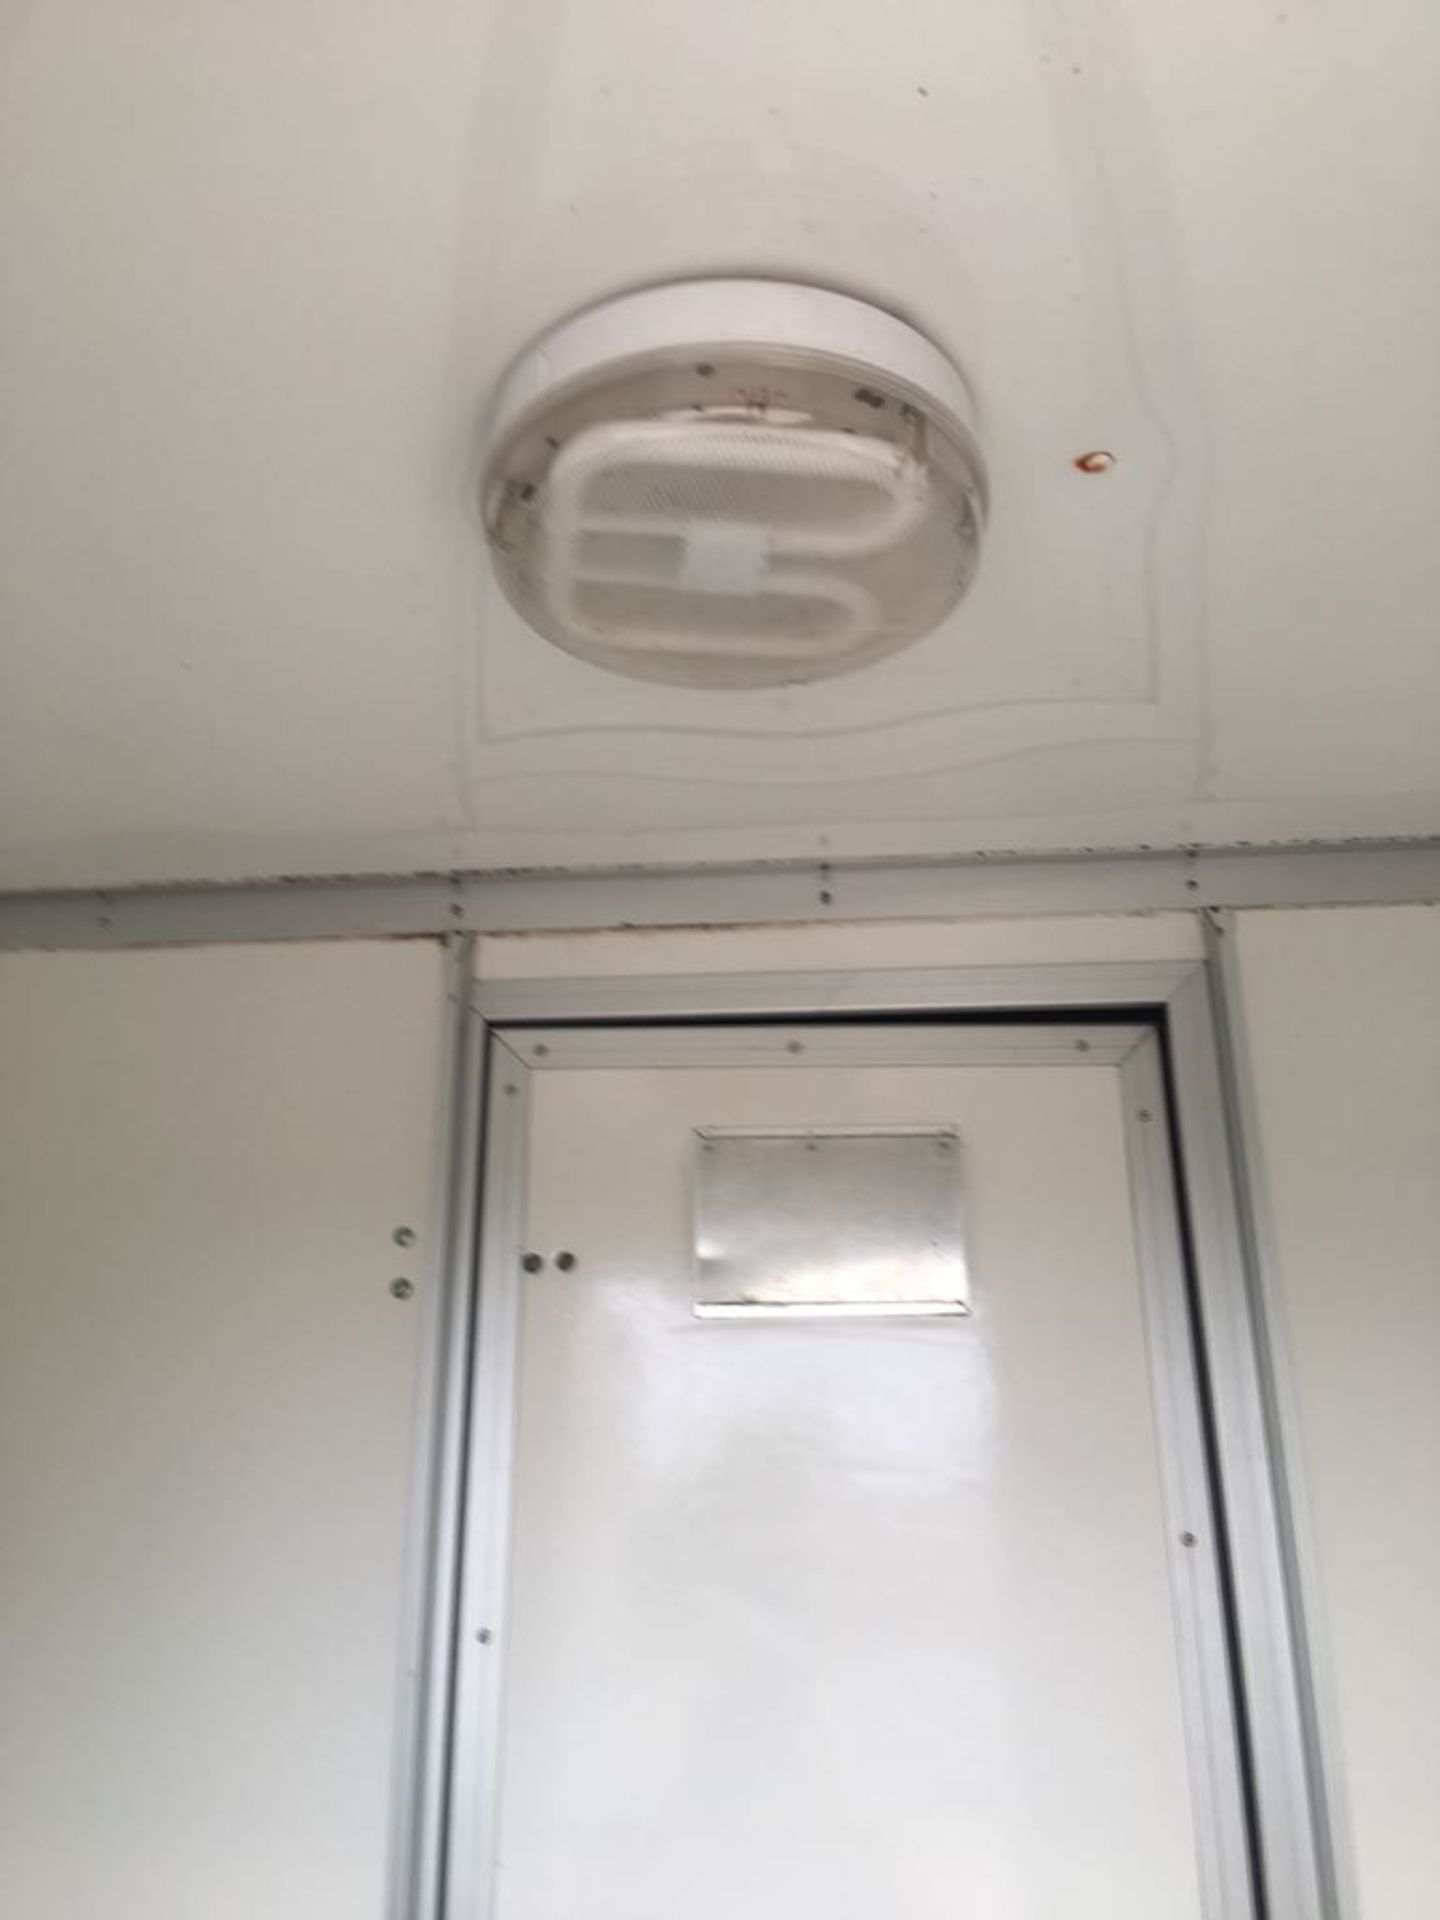 MOBILE TRAILER AMS TWIN SHOWER DECONTAMINATION UNIT AND CHANGING ROOMS - Image 12 of 27